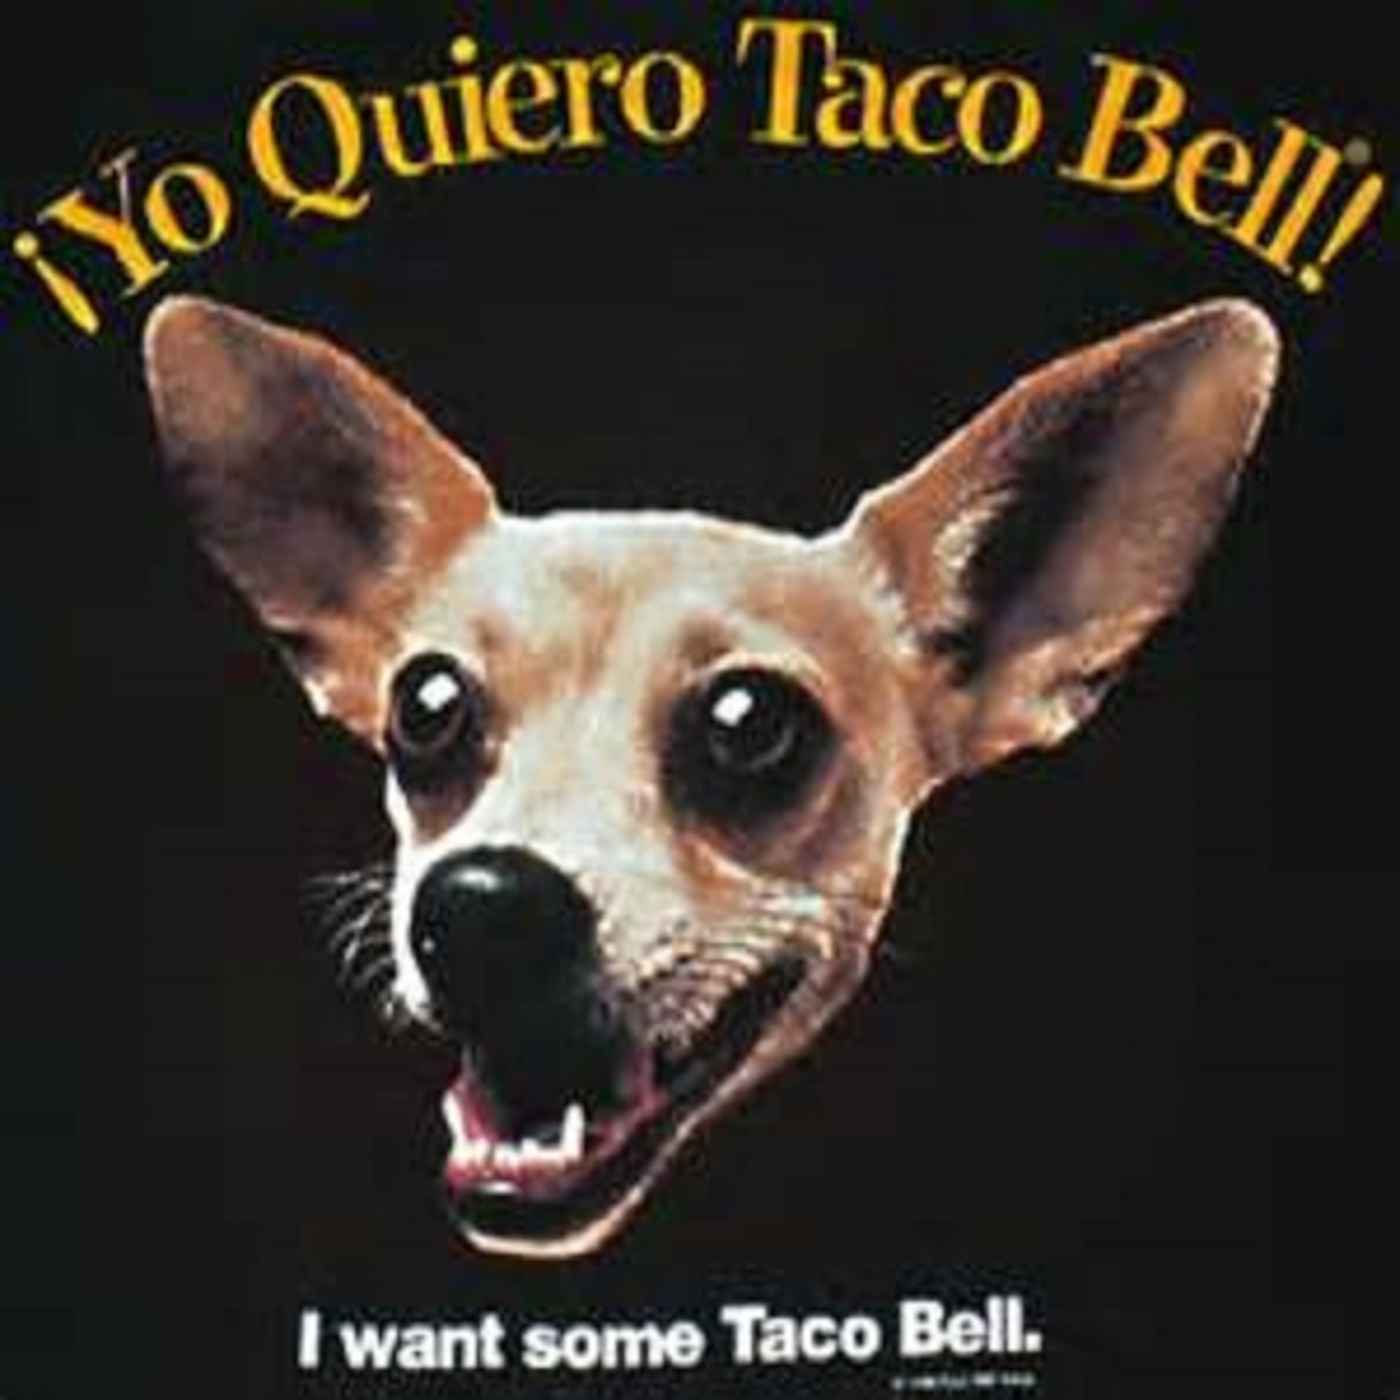 Episode 5 - The Taco Bell Chihuahua